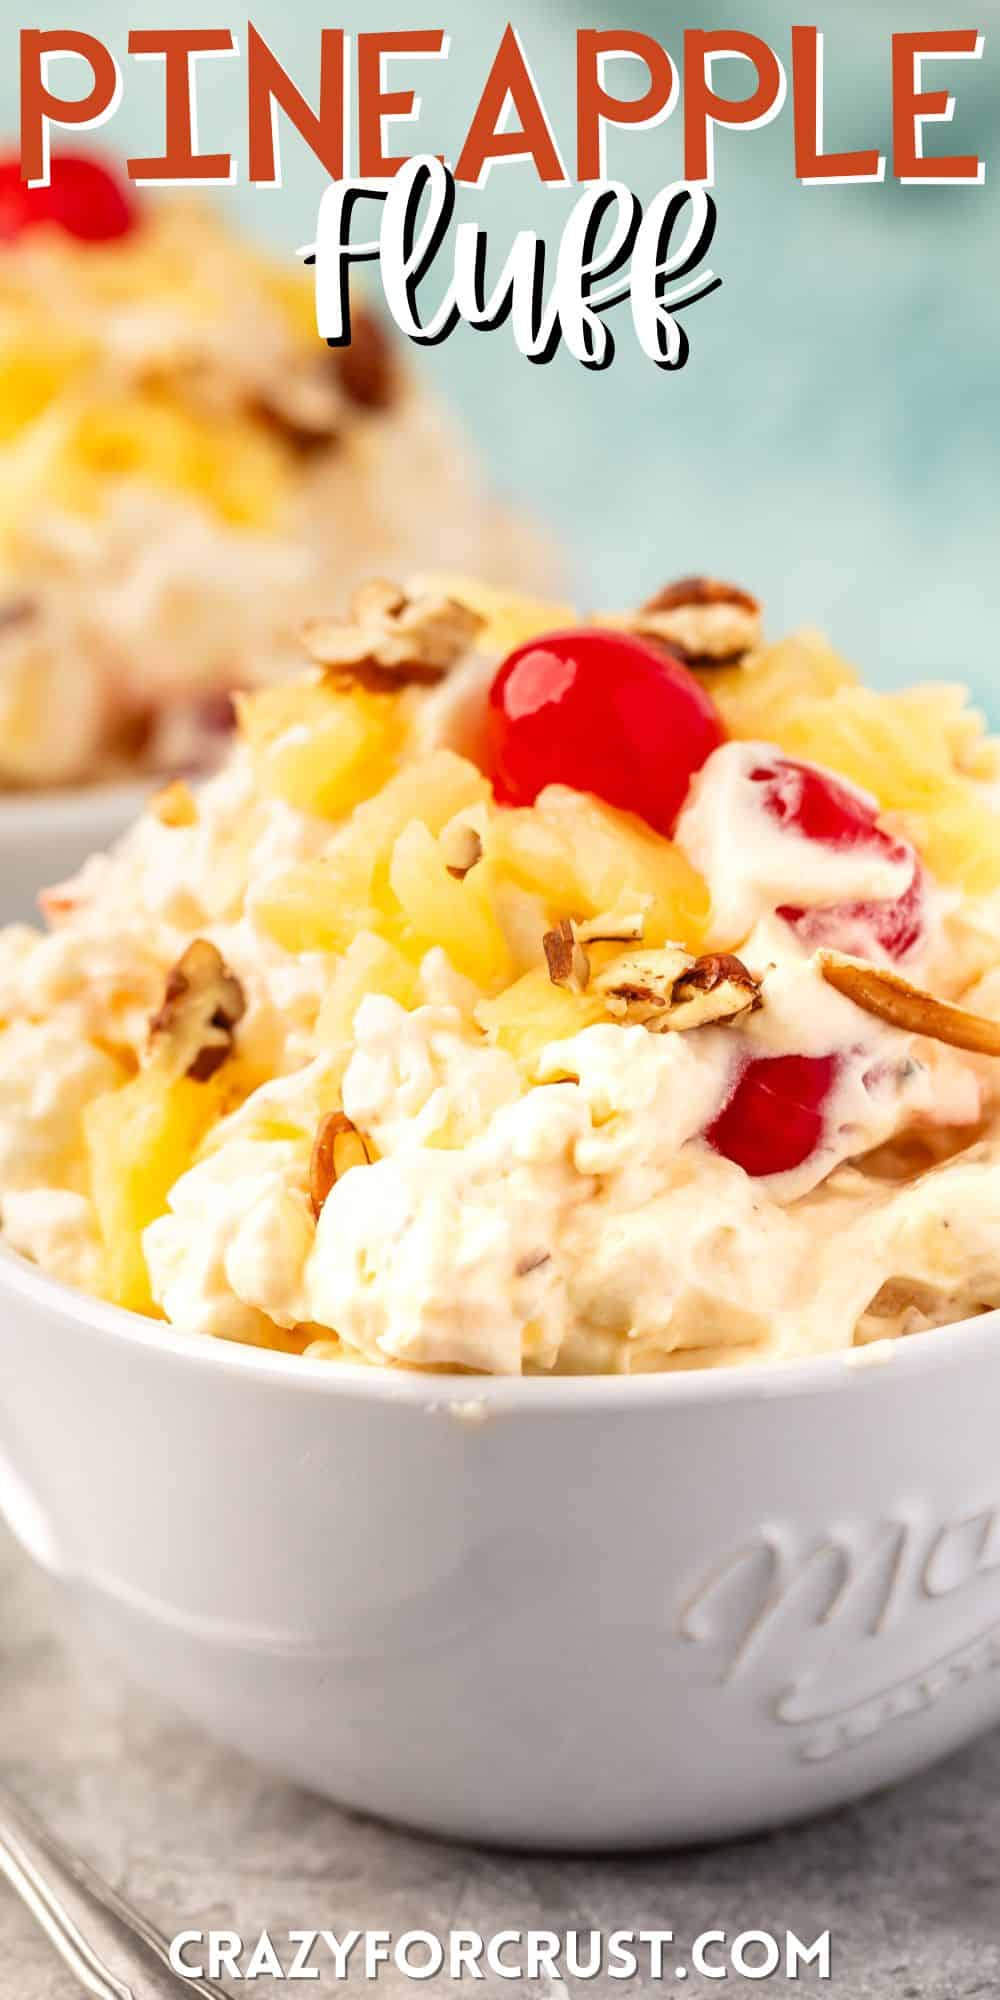 pineapple fluff with nuts and cherries on top in a white bowl with words on the image.